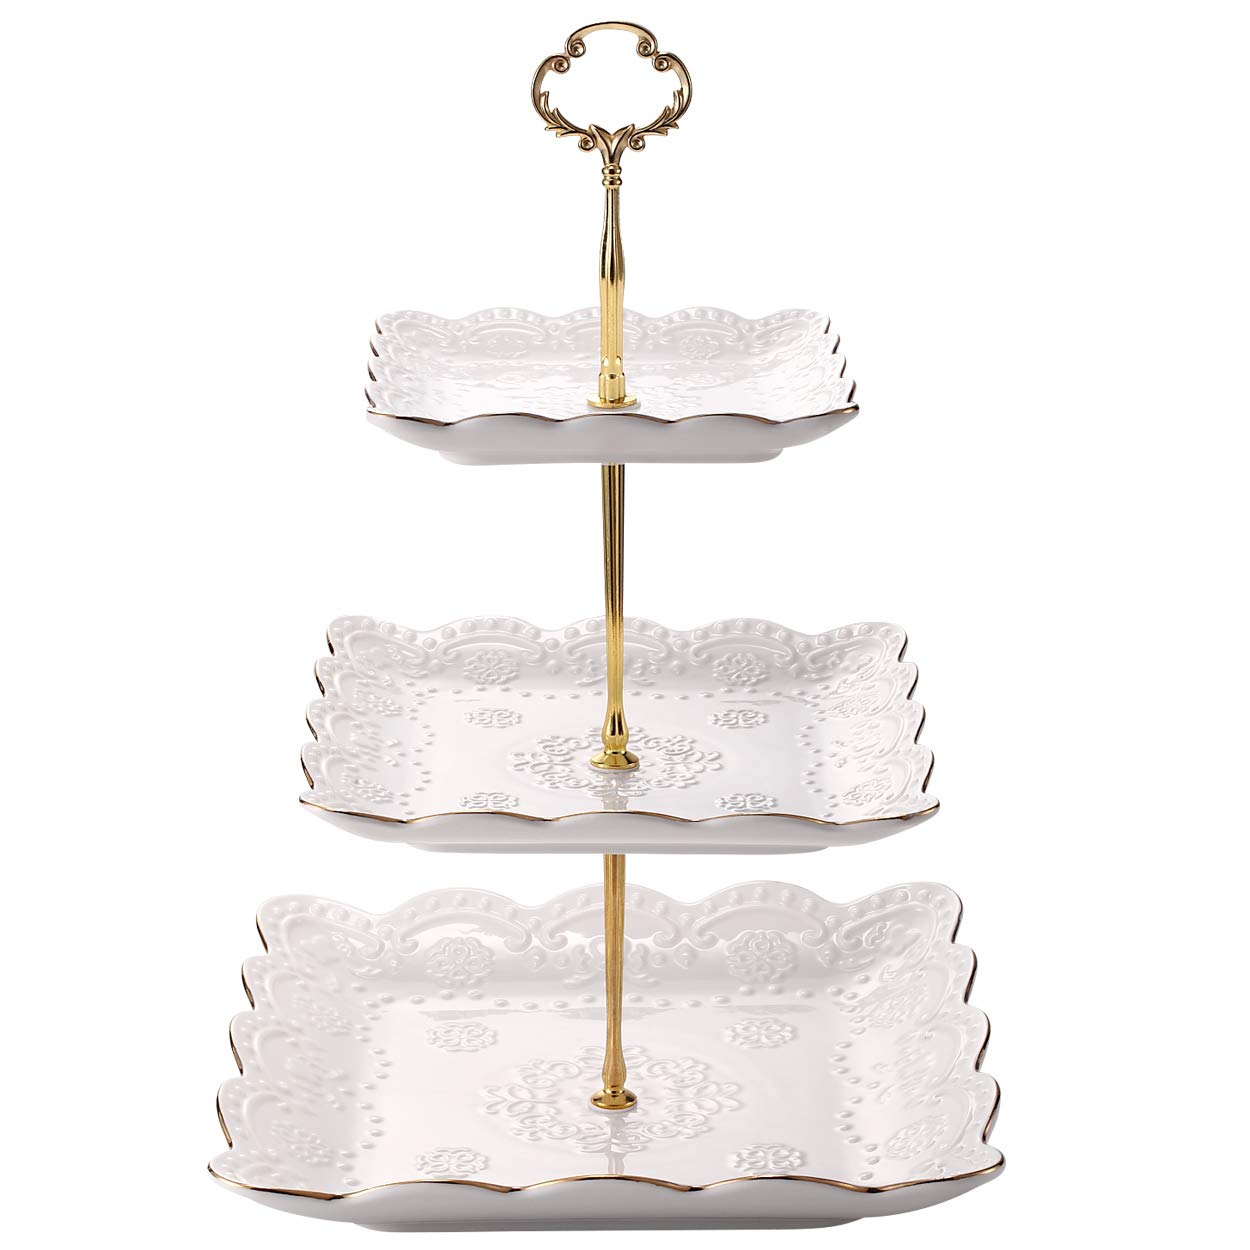 Sumerflos 3-Tier Square Porcelain Cake Stand, White Rimmed with Gold Embossed Cupcake Dessert Stand - Tiered Serving Tray for Tea Party and Show